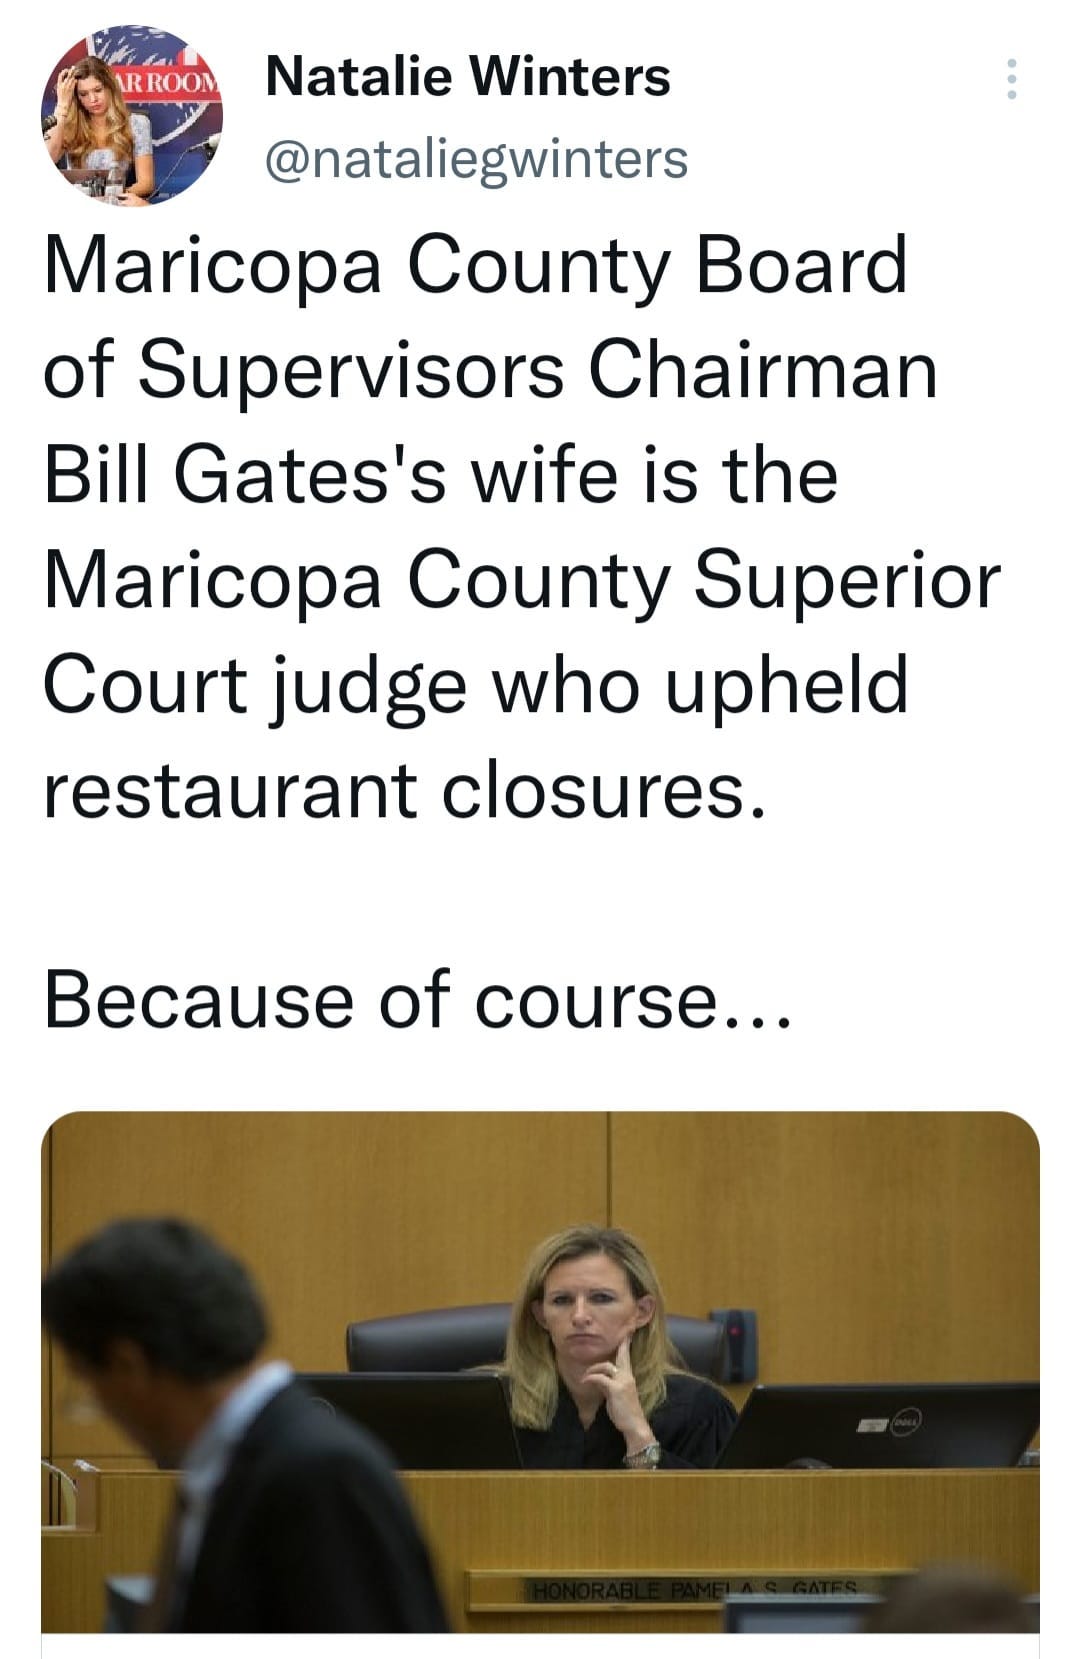 May be an image of 2 people and text that says 'ARROOM Natalie Winters @nataliegwinters Maricopa County Board of Supervisors Chairman Bill Gates's wife is the Maricopa County Superior Court judge who upheld restaurant closures. Because of course...'